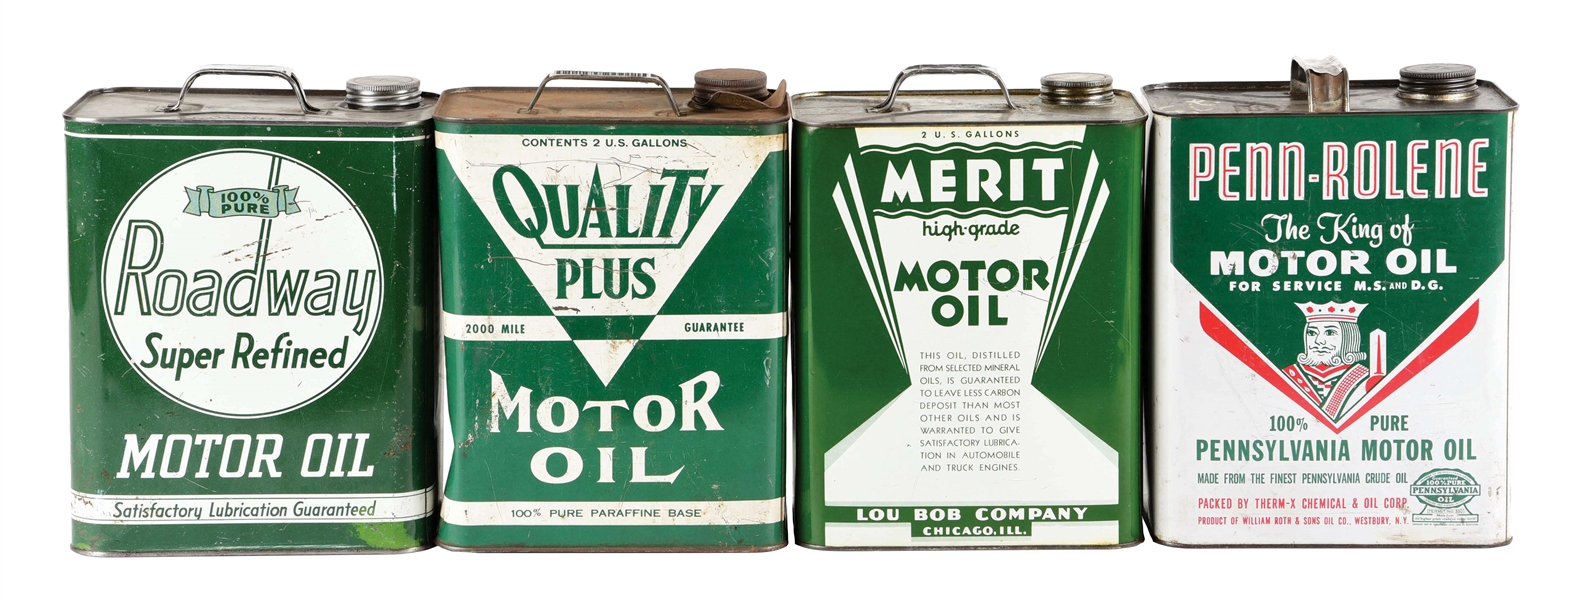 LOT OF 4: TWO GALLON OIL CANS FROM MERIT, PENN-ROLENE, QUALITY PLUS & ROADWAY MOTOR OILS. 